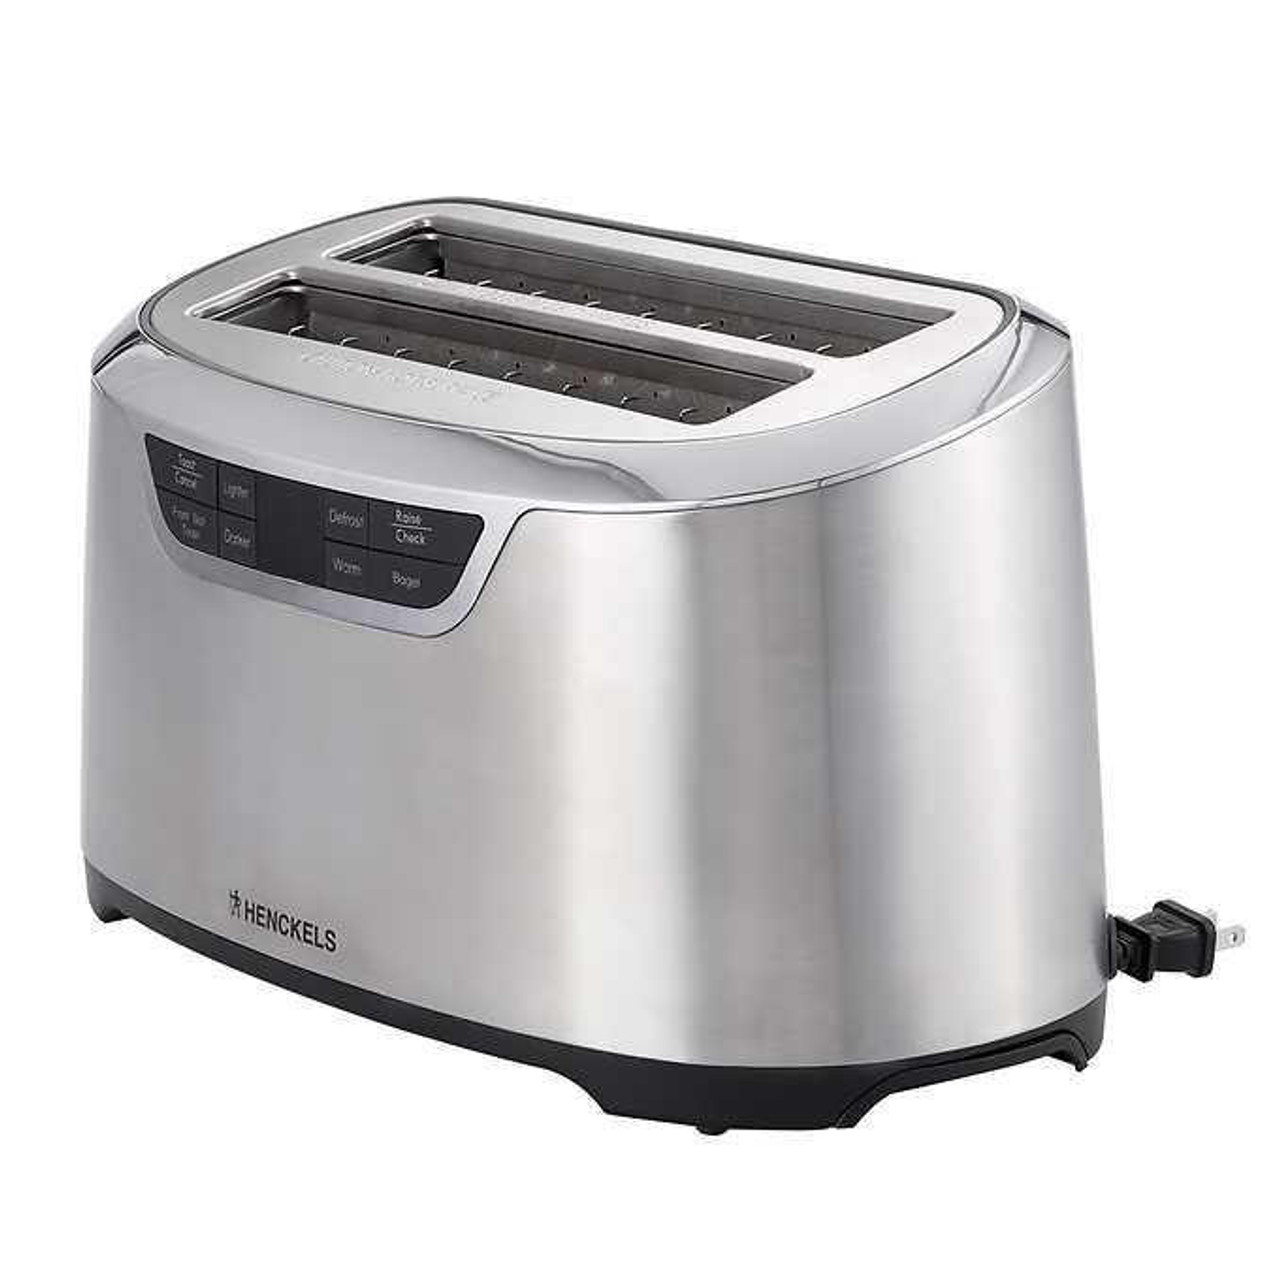 https://cdn11.bigcommerce.com/s-g5ygv2at8j/images/stencil/1280x1280/products/13782/31906/henckels-statement-stainless-steel-4-slice-long-slot-automatic-toaster__70033.1694498221.jpg?c=1